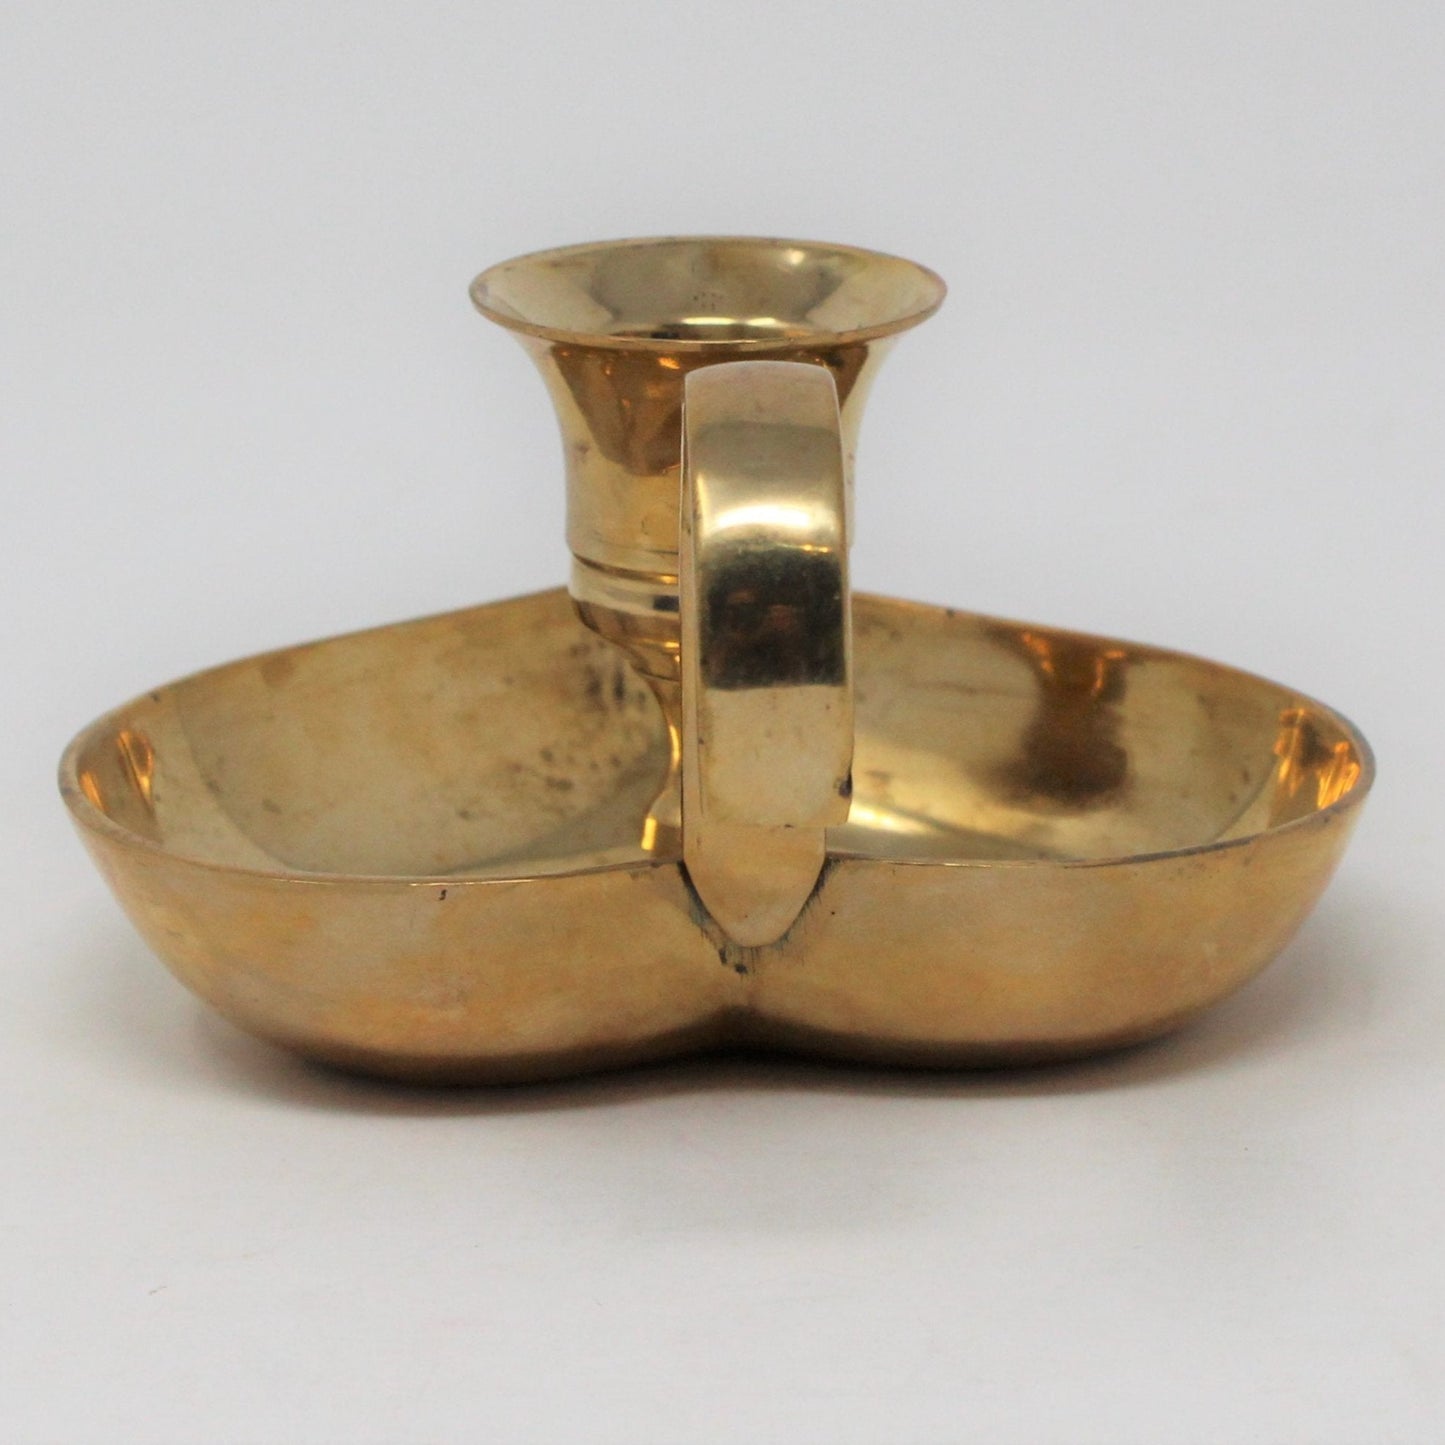 Candle Holder / Chamberstick, Heart Shaped, Brass Taper, India